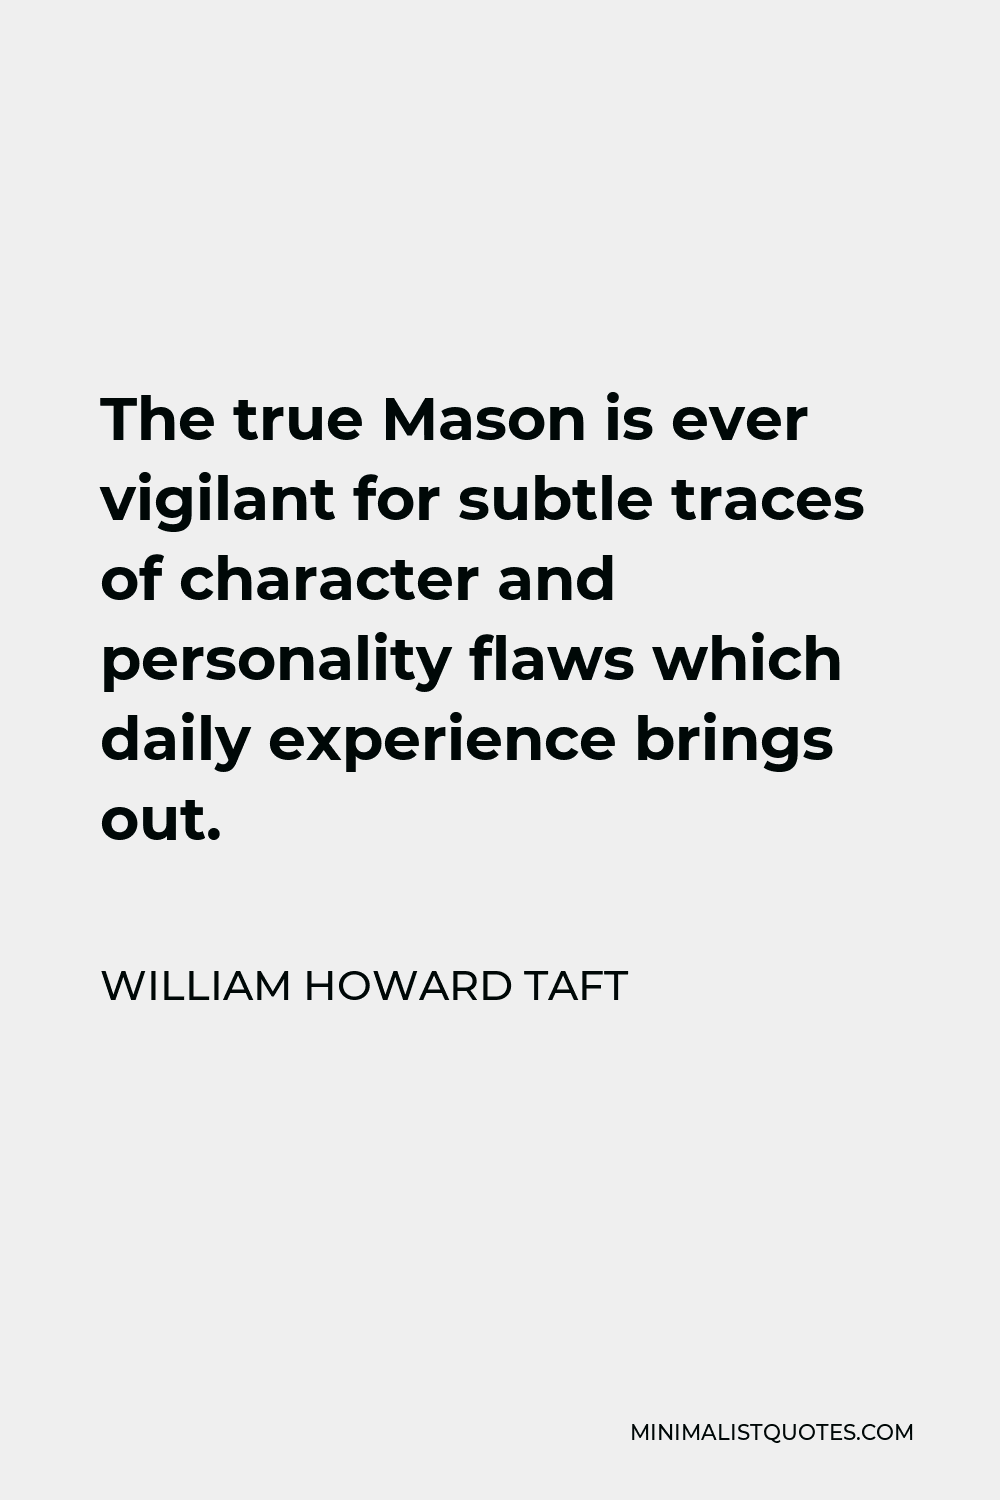 William Howard Taft Quote - The true Mason is ever vigilant for subtle traces of character and personality flaws which daily experience brings out.